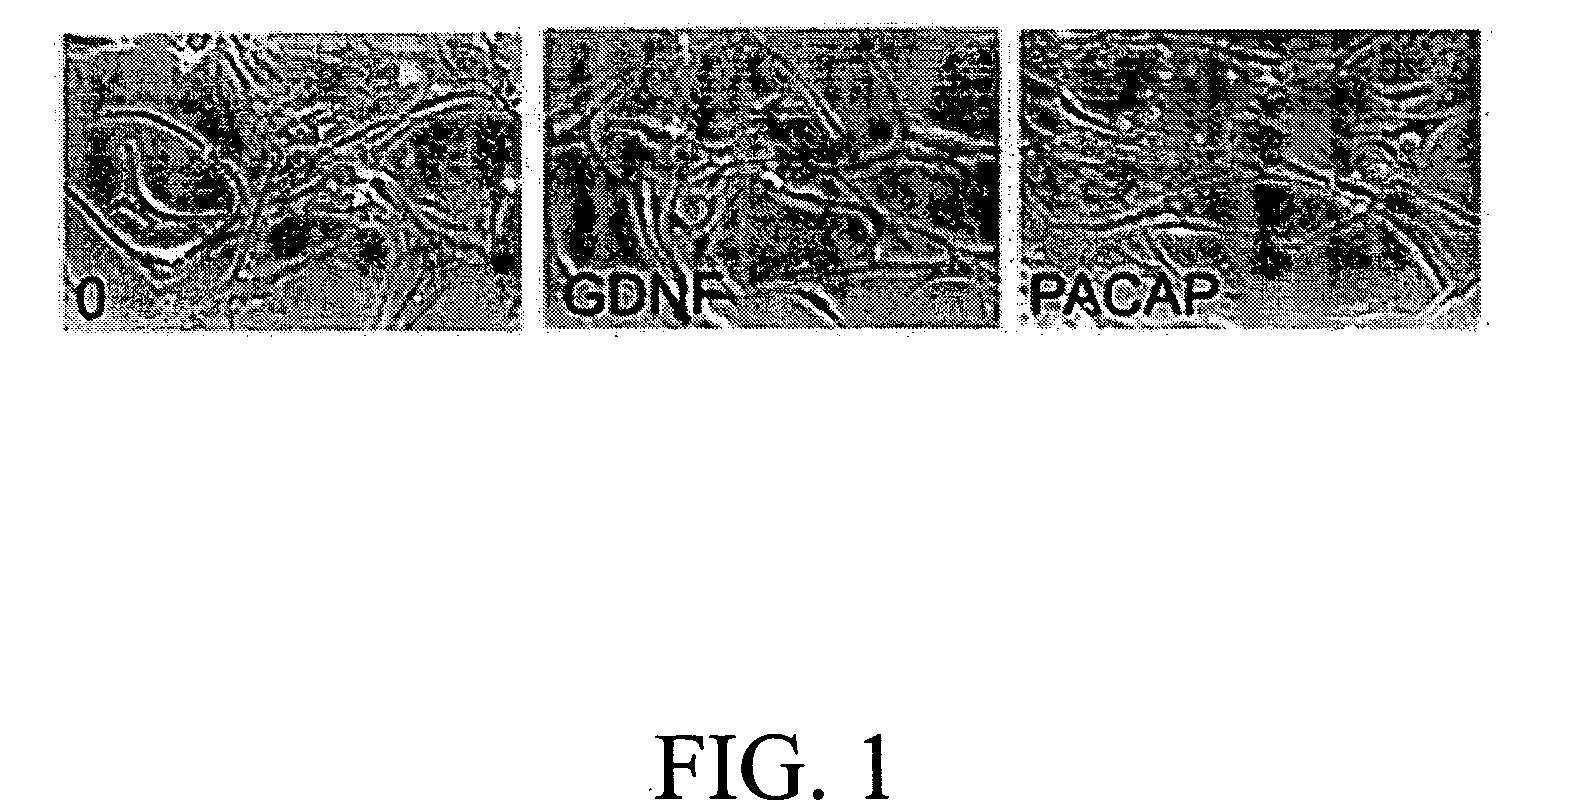 Method for inducing neural differentiation